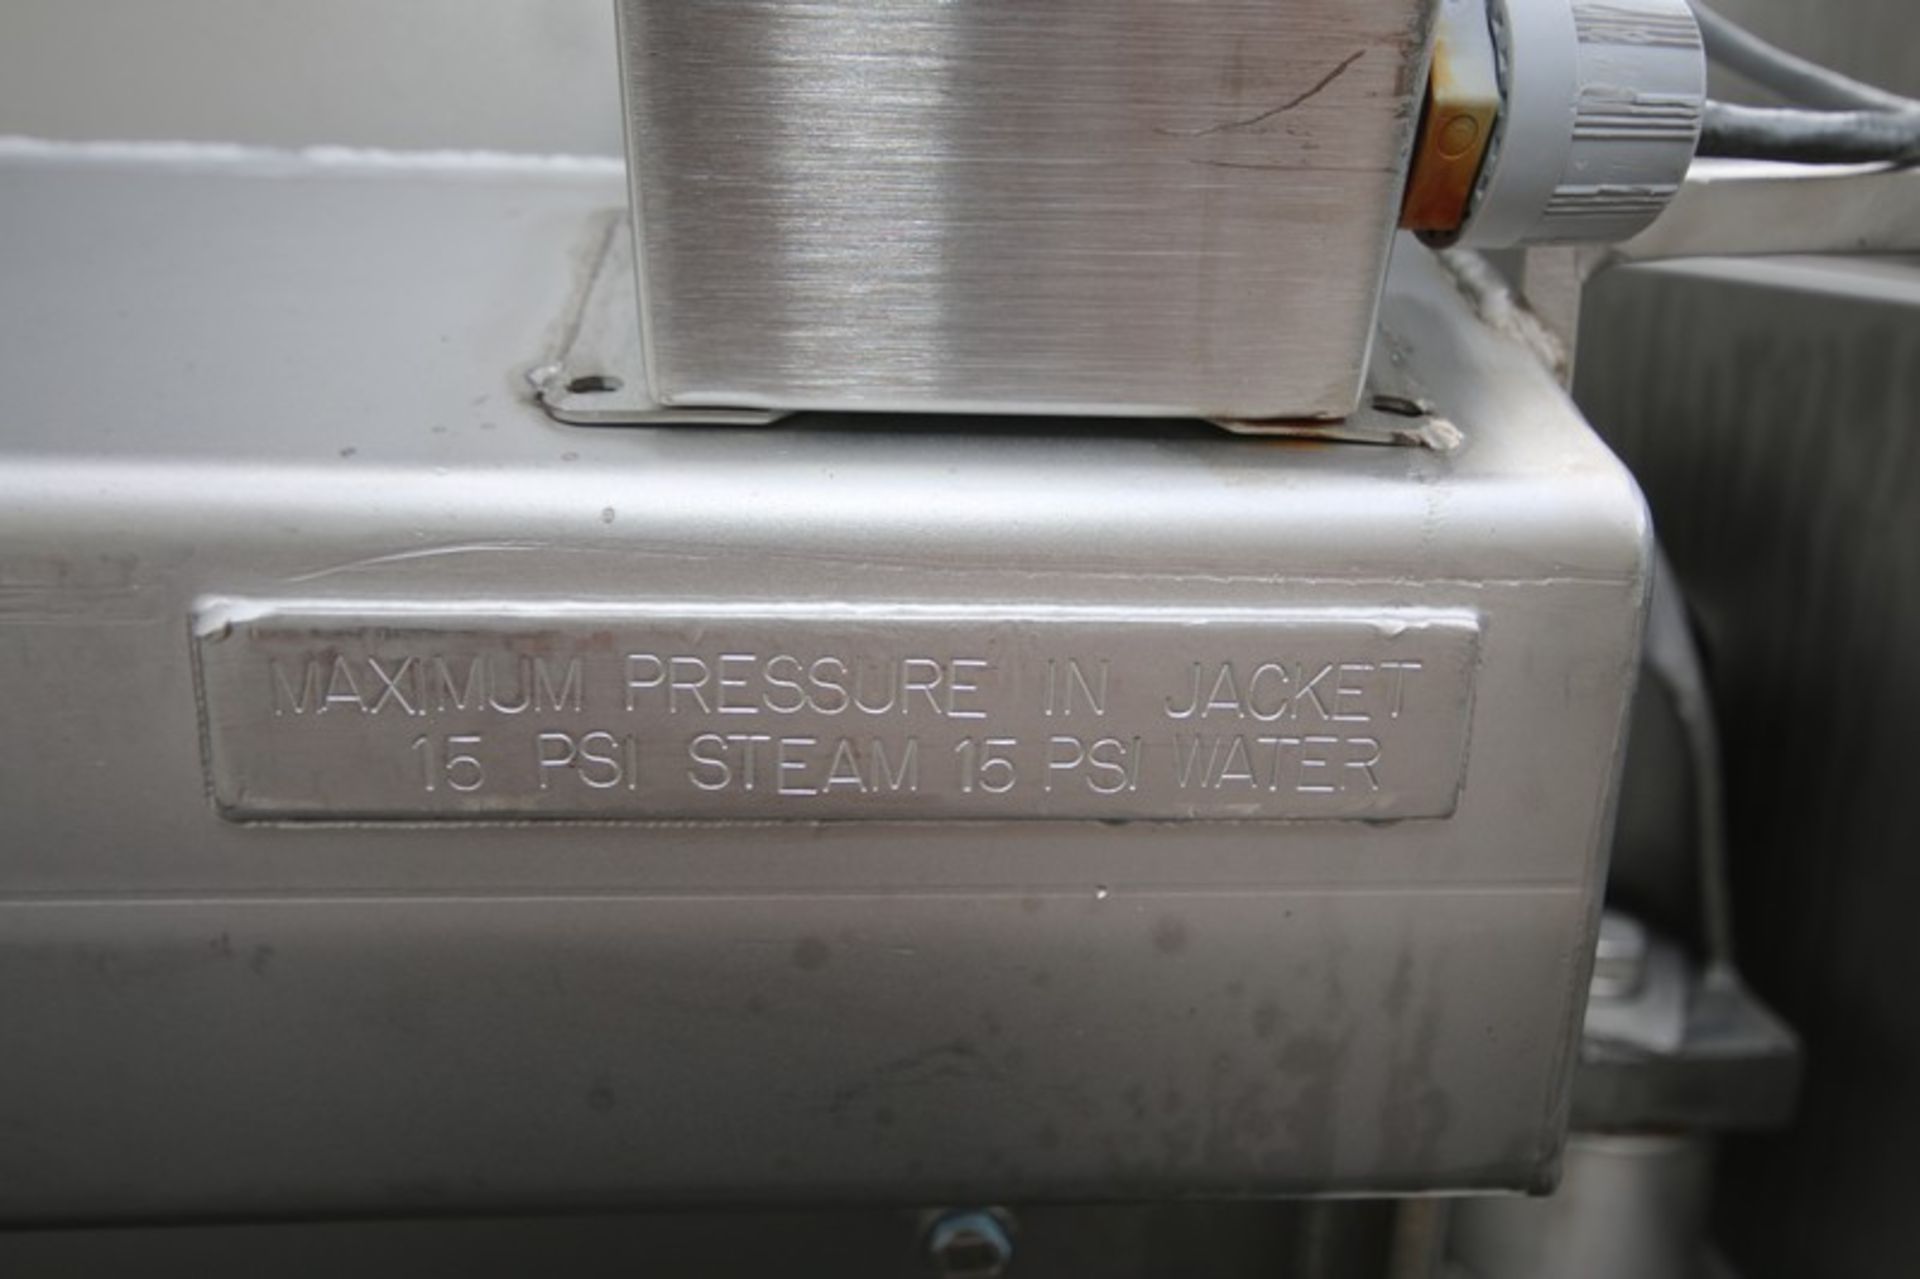 Custom Stainless Equipment Company, Aprox. 6" L x 56" W x 47" D, Jacketed S/S Paddle Blender, - Image 11 of 13